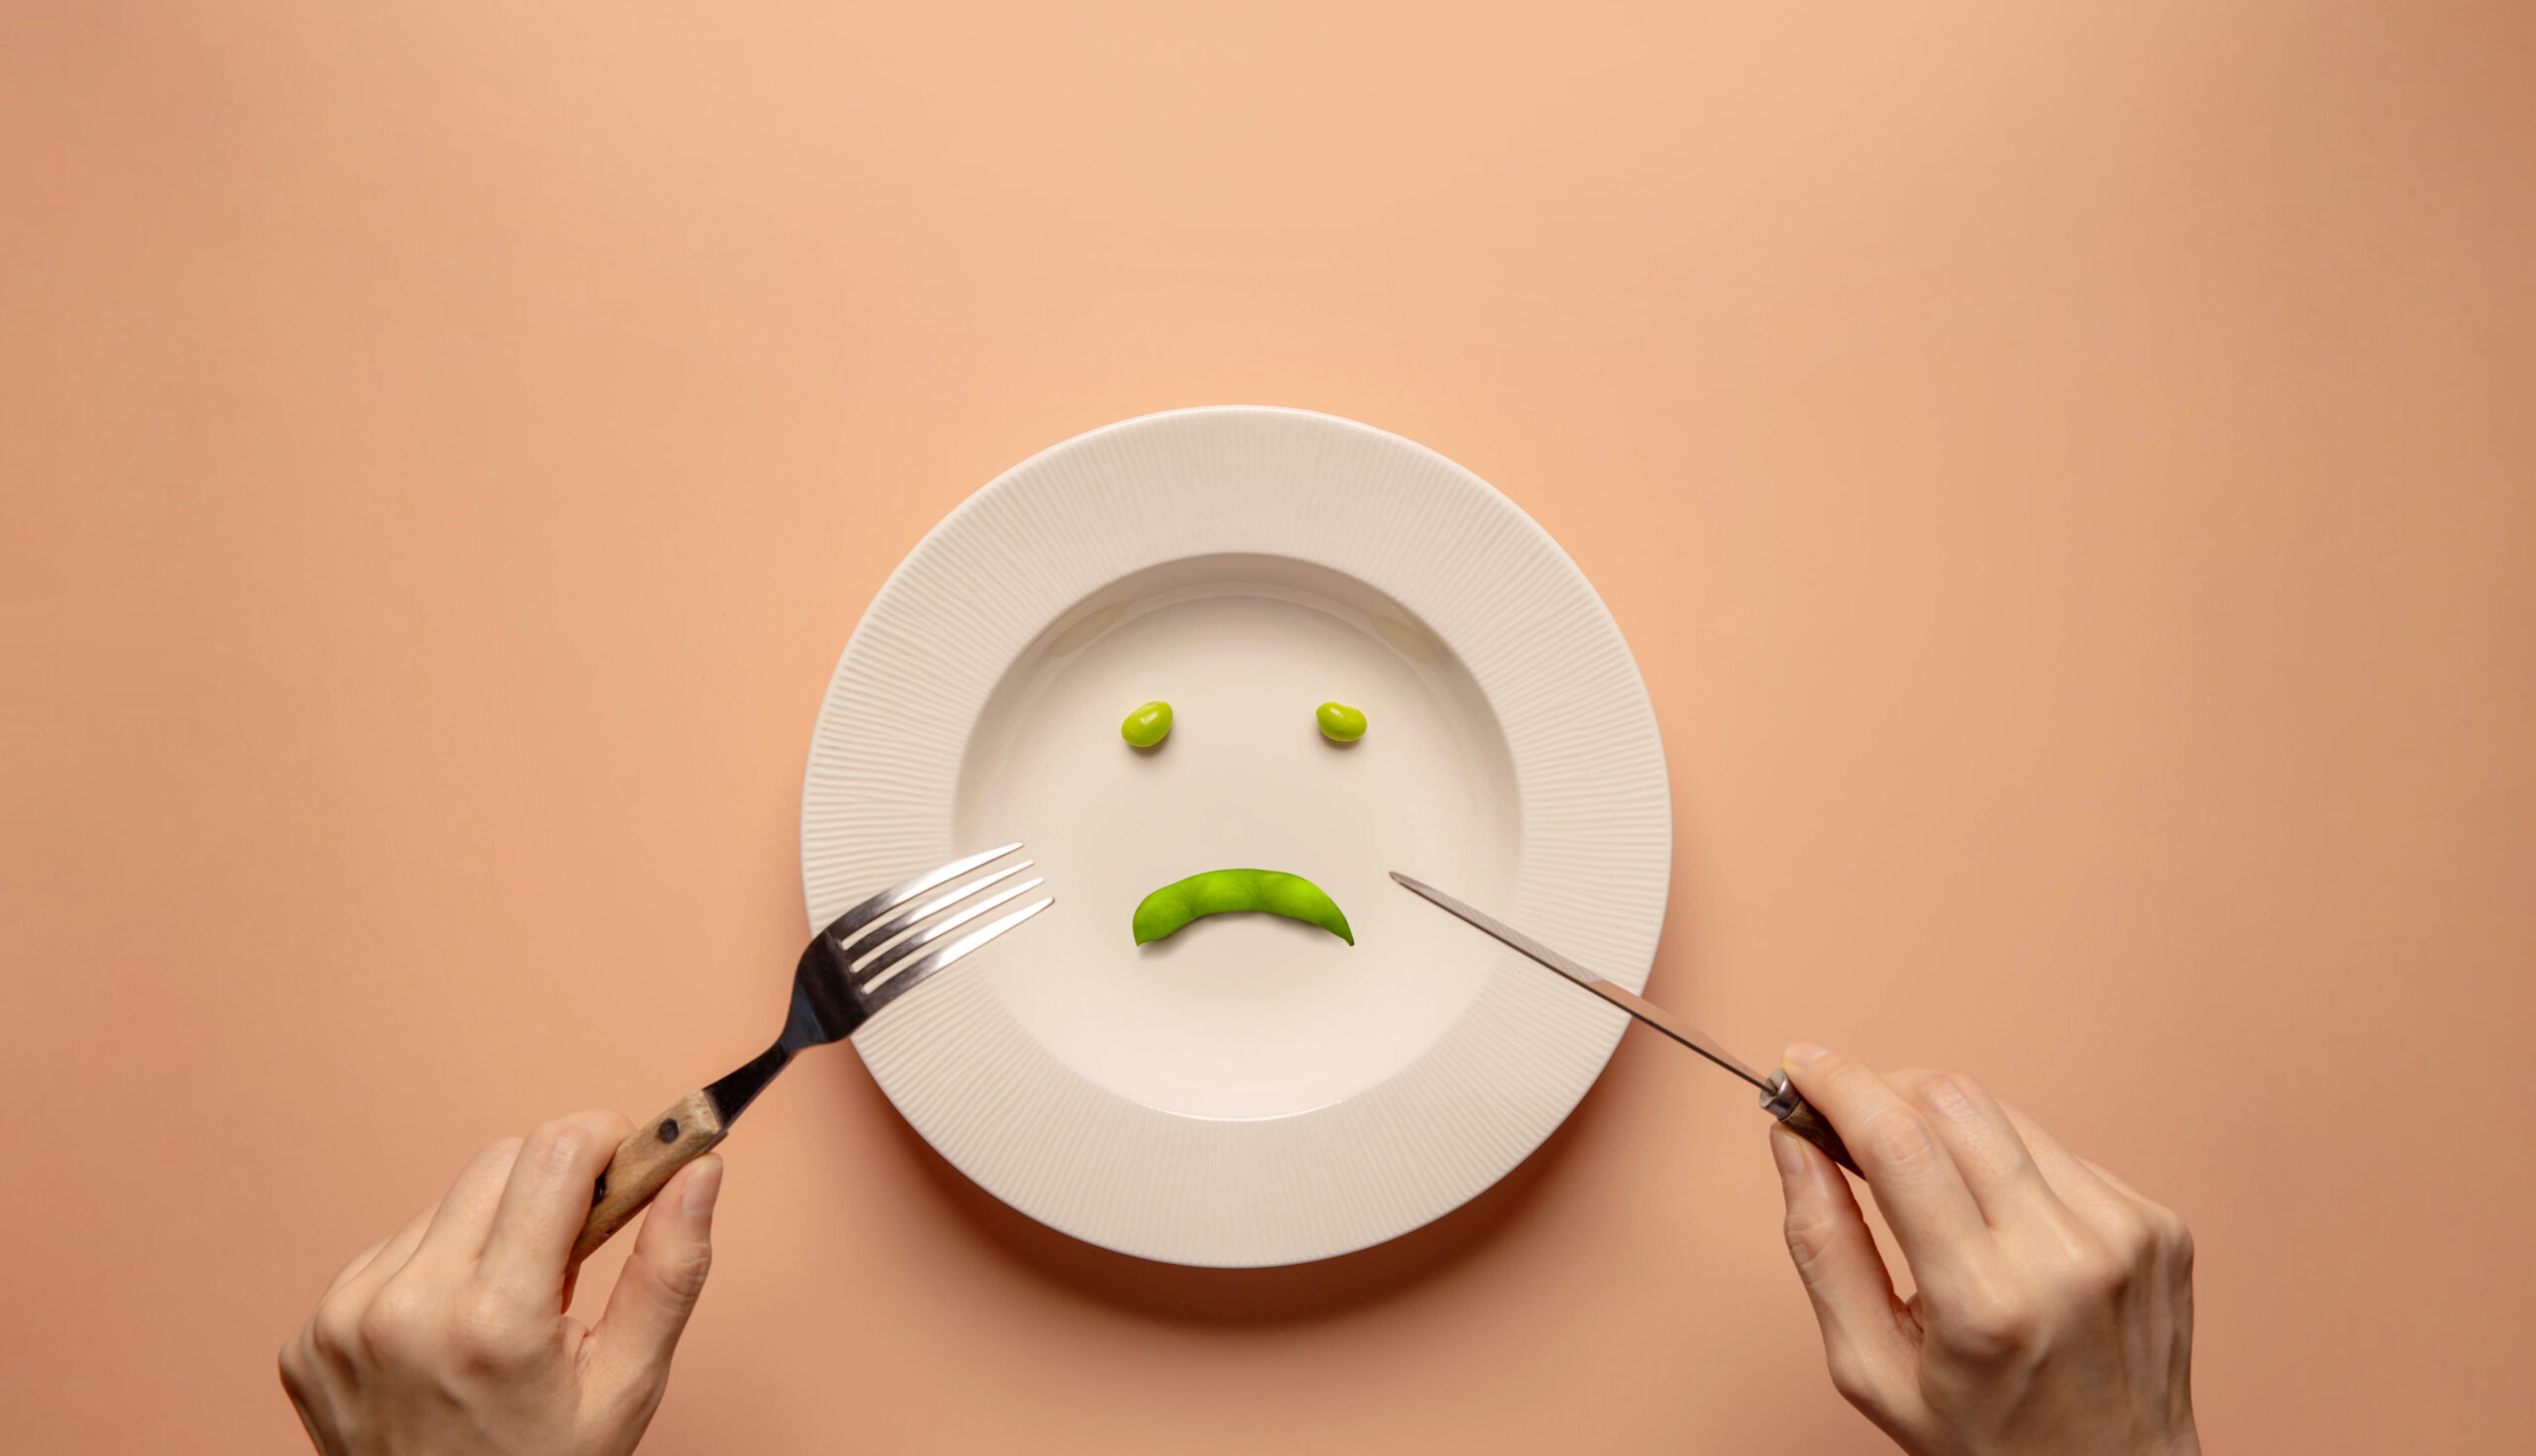 A Guide to Eating Disorders and Where to Get Support